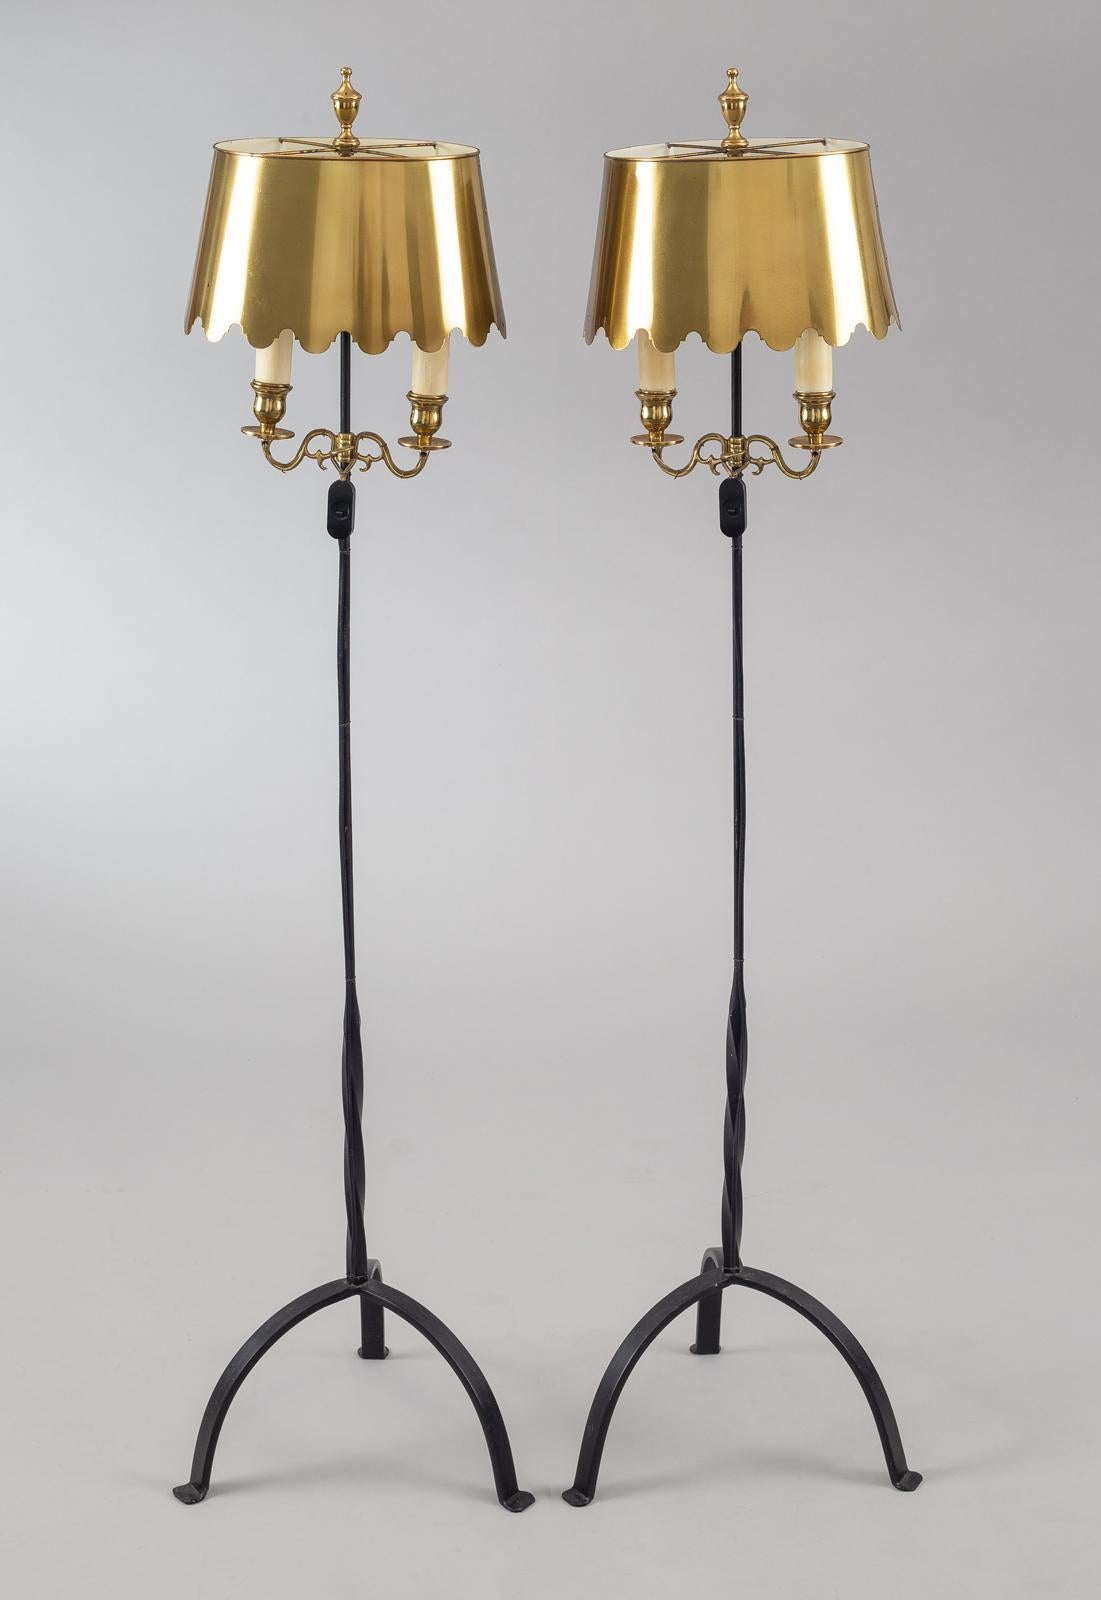 Pair of vintage Fortuny floor lamps, the tripod pedestal bases are wrought iron and the oval-shaped scalloped shades are brass, as are the two candle arms and finials.